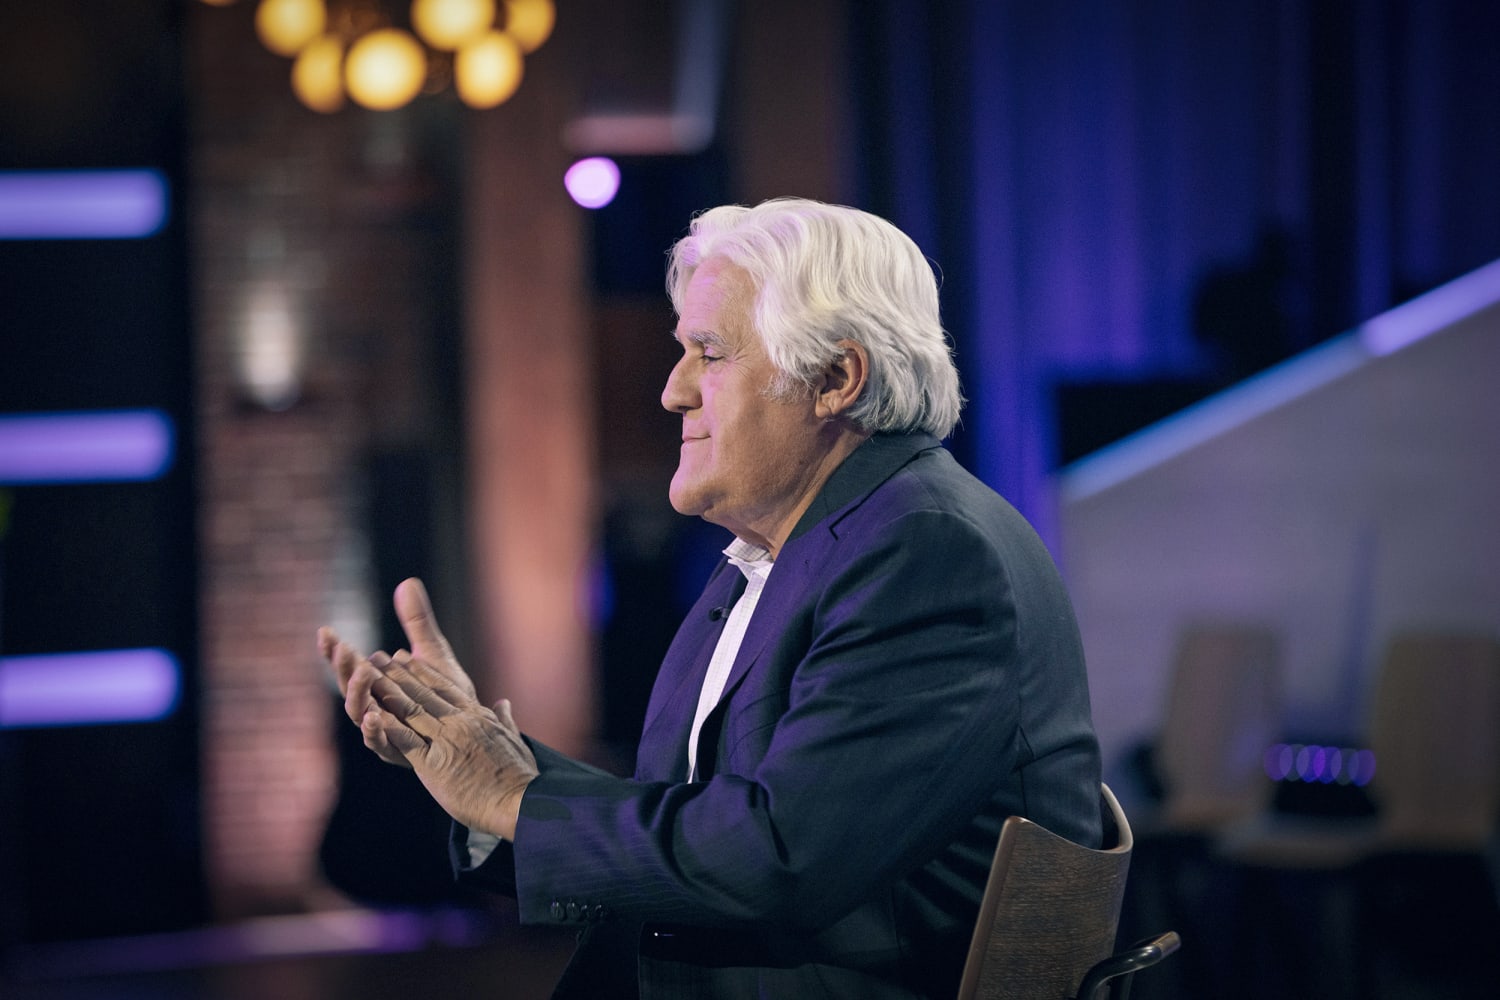 Jay Leno reportedly suffers broken bones in motorcycle accident months after garage fire